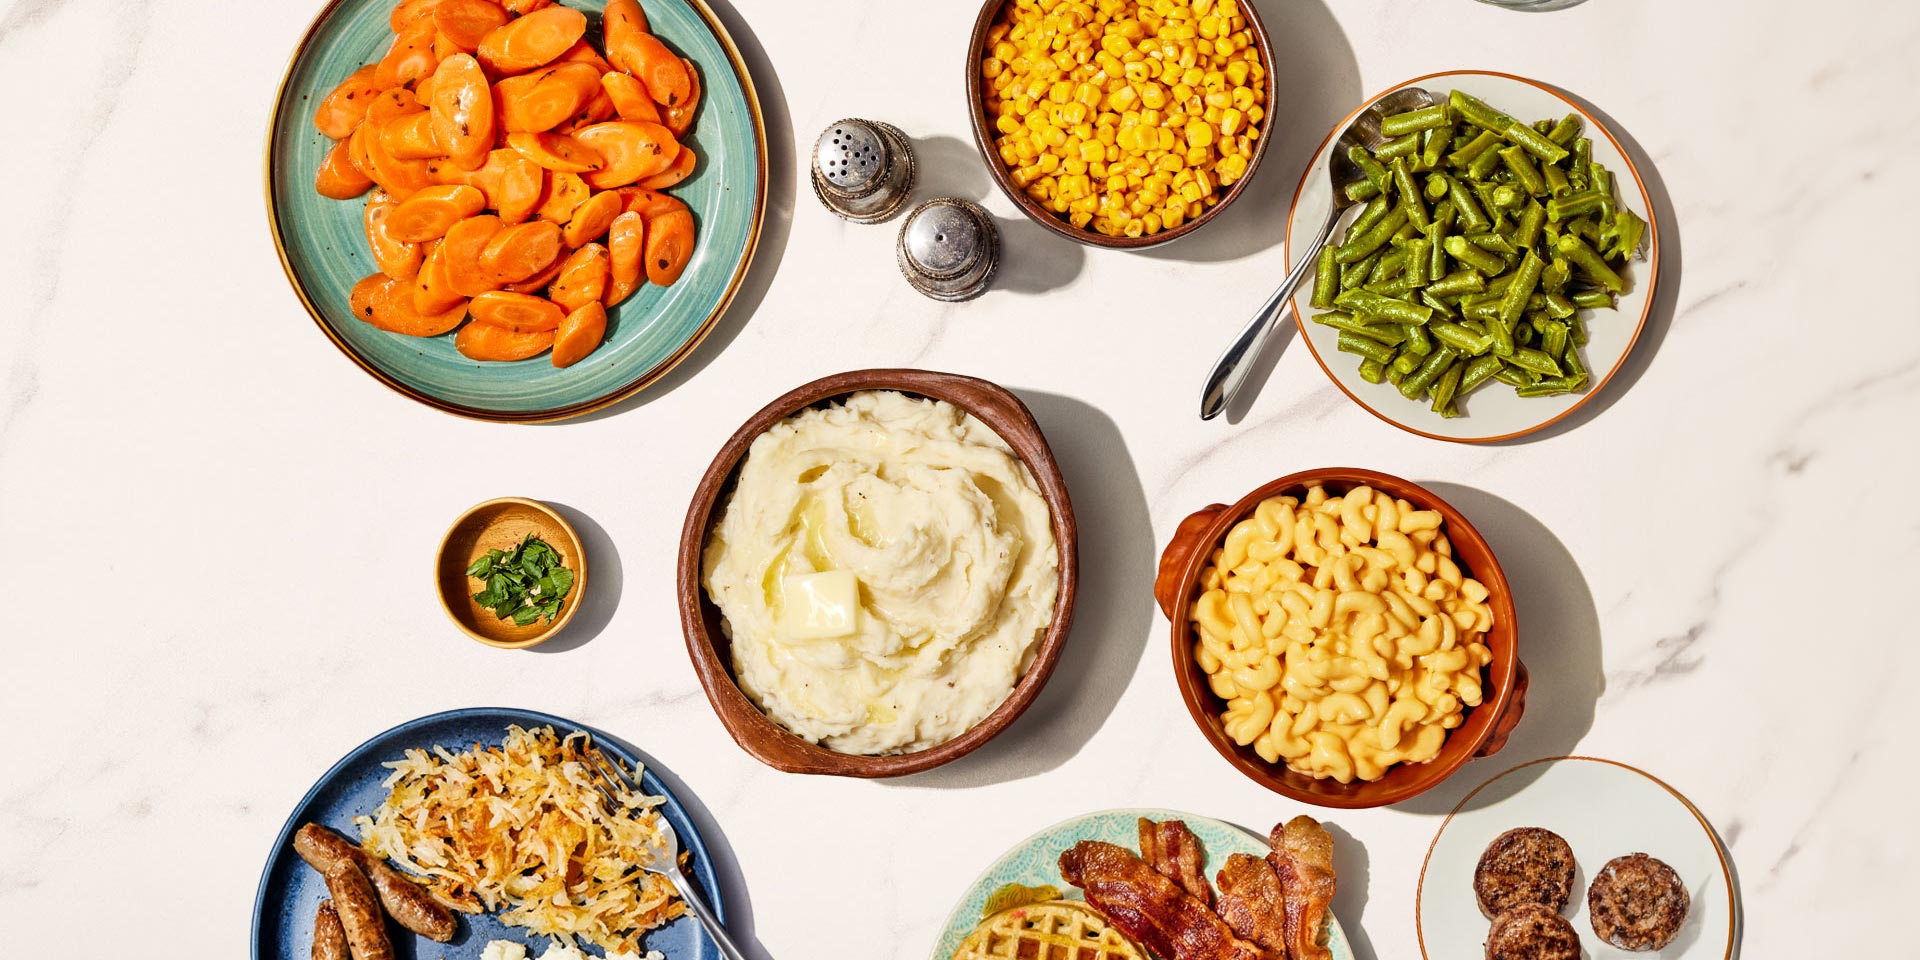 Photo of a variety of Bob Evans dishes, including sausage, bacon, carrots, mashed potatoes, corn, and green beans